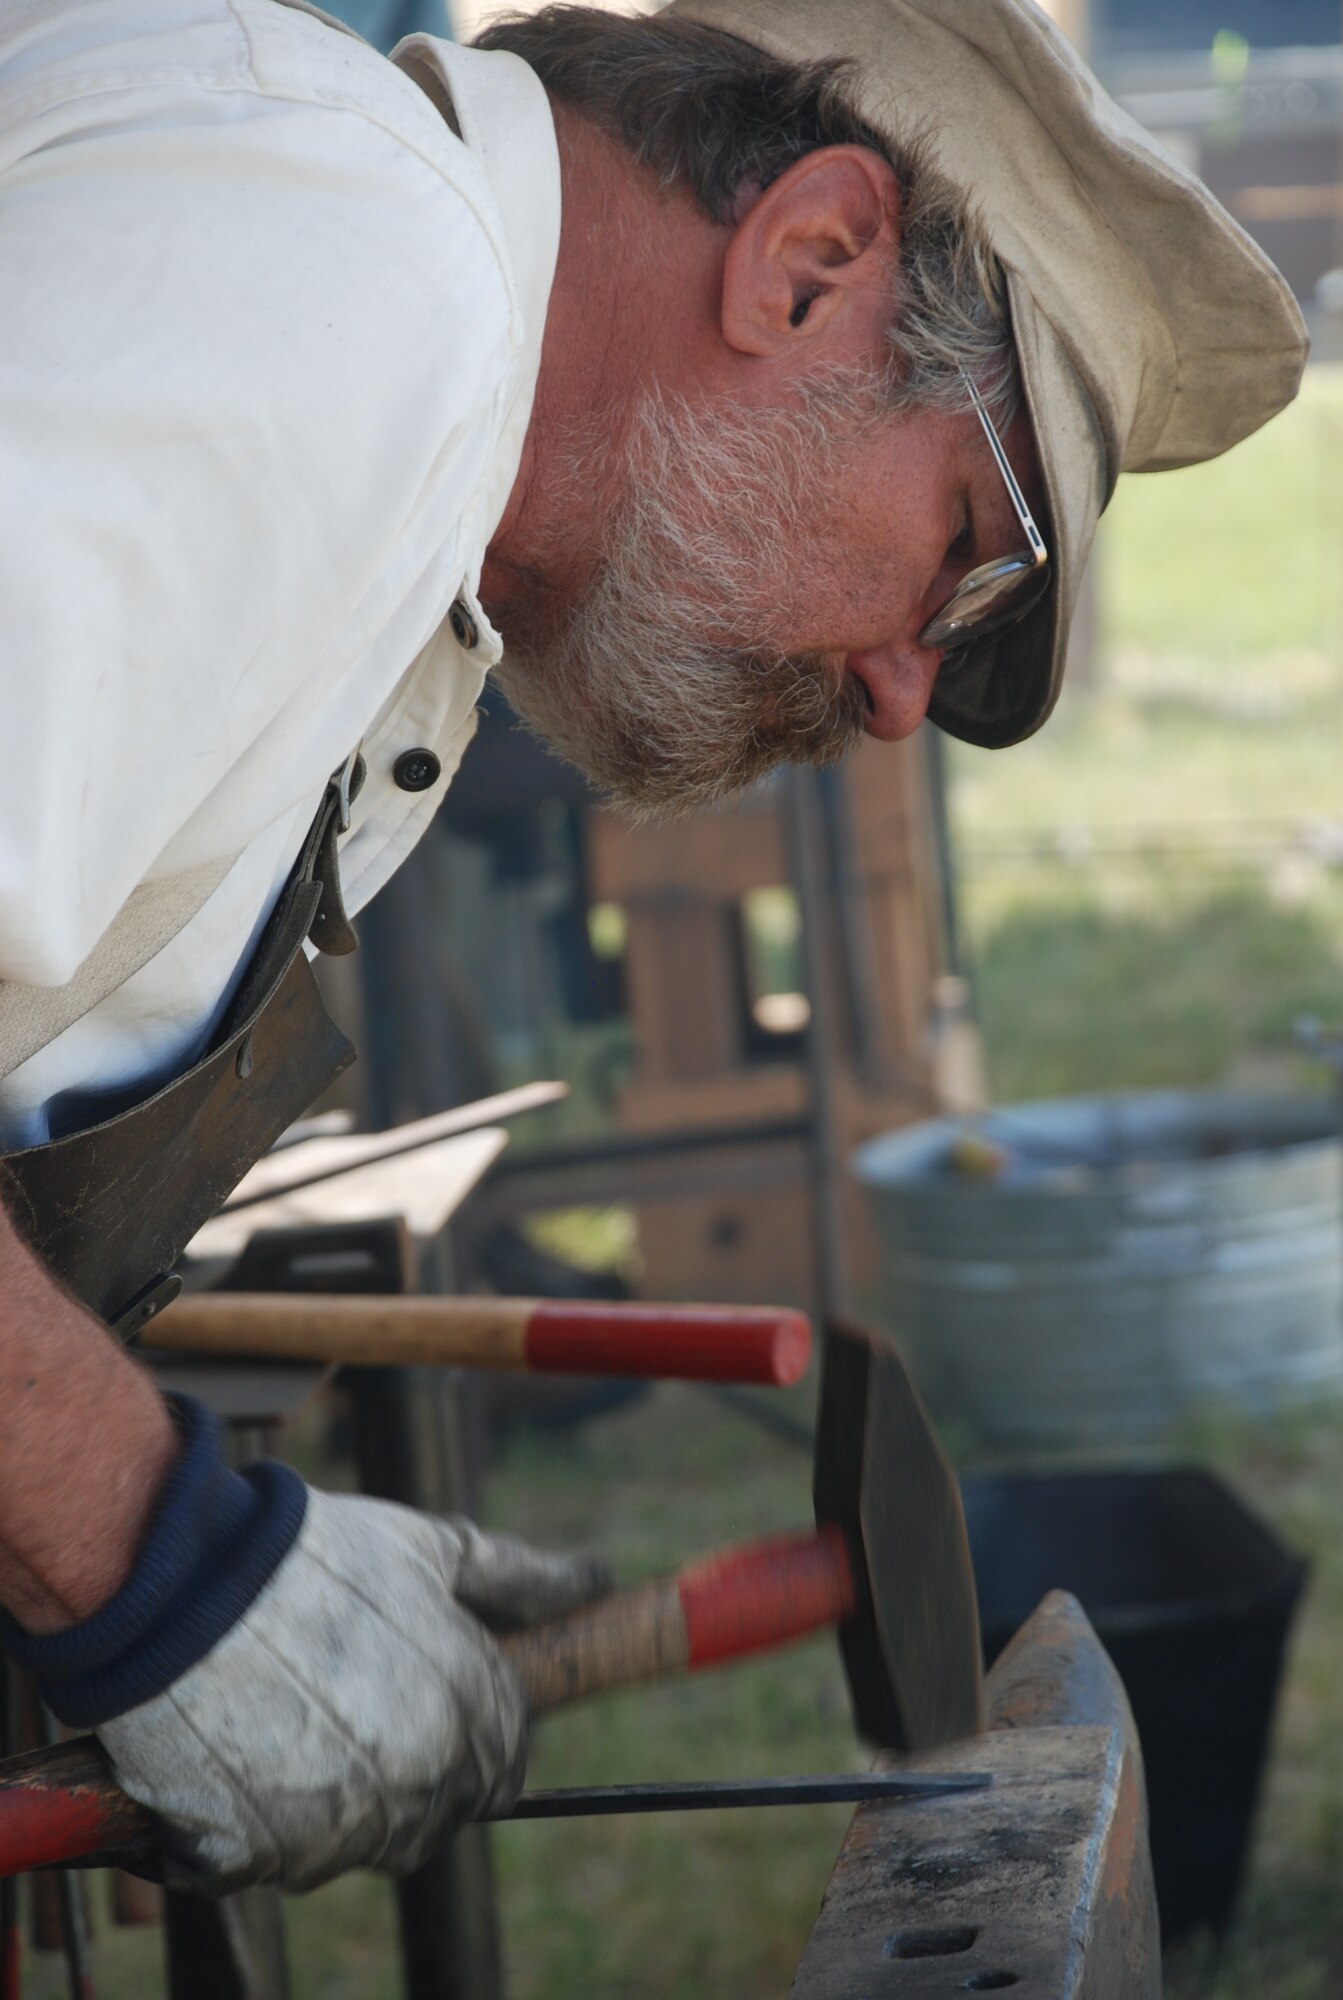 Jan Manning portrays a blacksmith during the living-history demonstrations at Fort D.A. Russell days July 11. Mr. Manning is making an S hook, which is used for hanging decorations and plants. A number of patrons were able to keep the S hooks as souveniers. (U.S. Air Force photo/Senior Airman Daryl Knee)